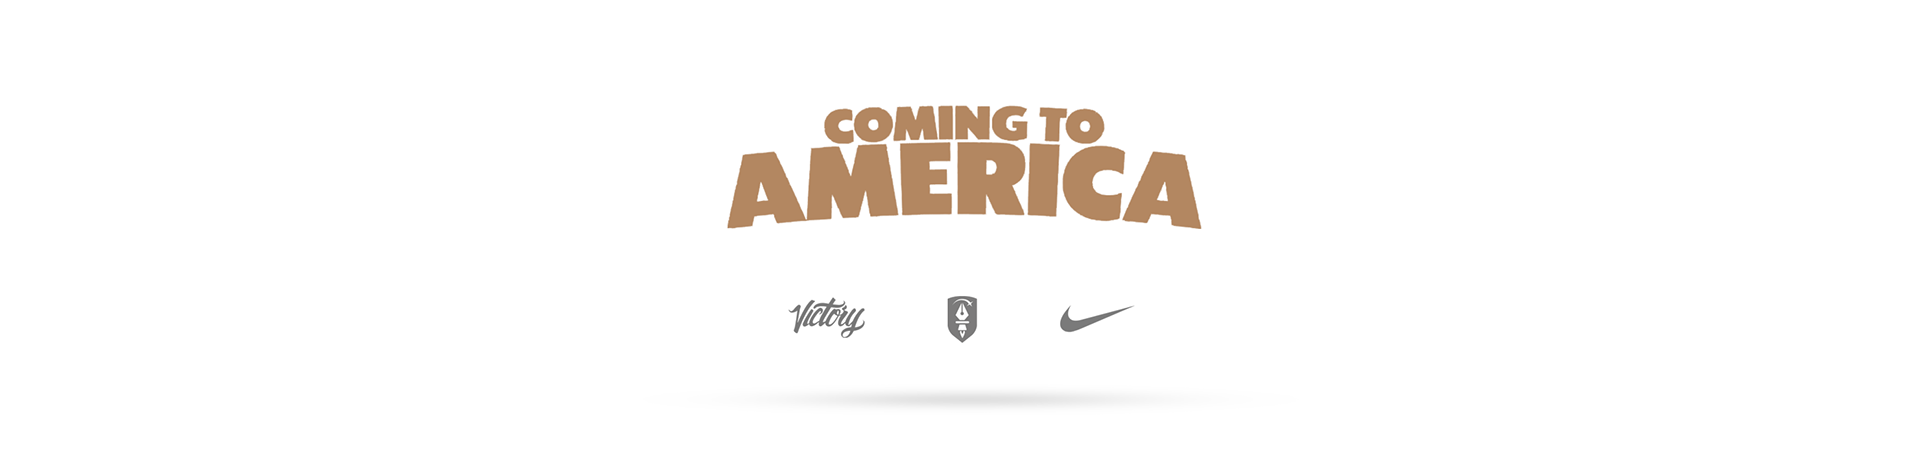 Aaron Campbell Coming To America Nike Basketball